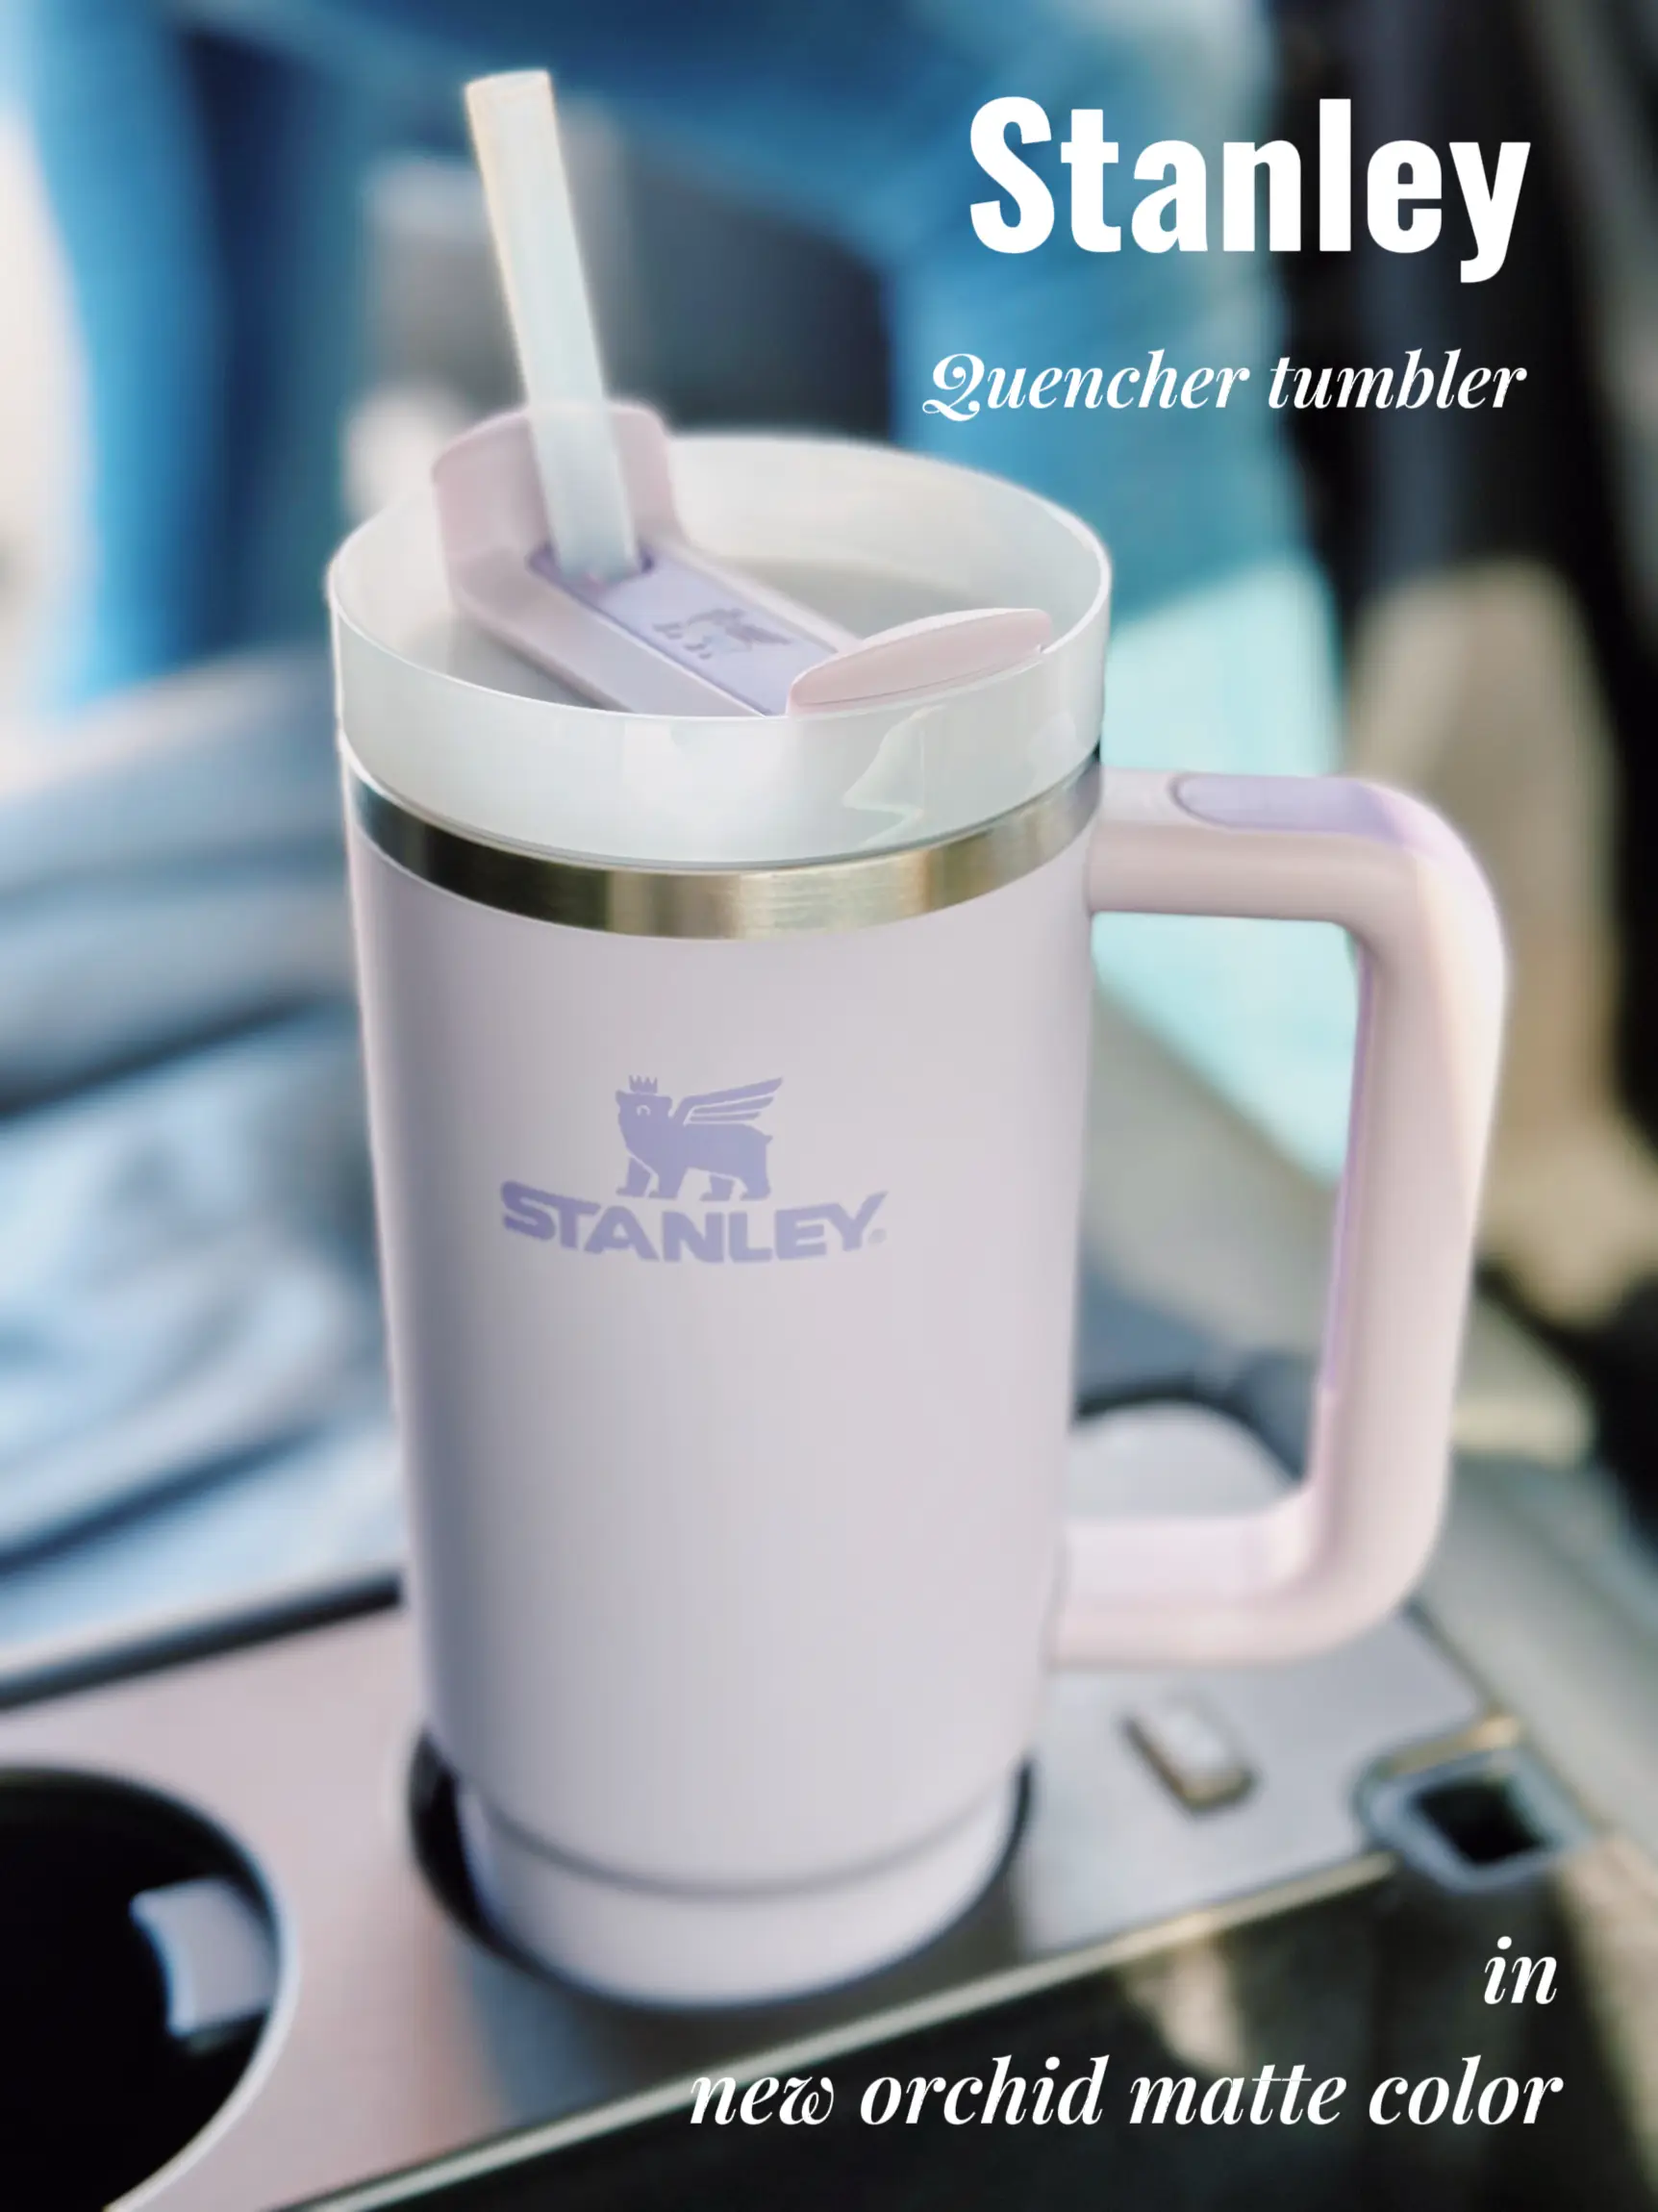 Stanley quencher tumbler 💜, Gallery posted by Liliaeffect